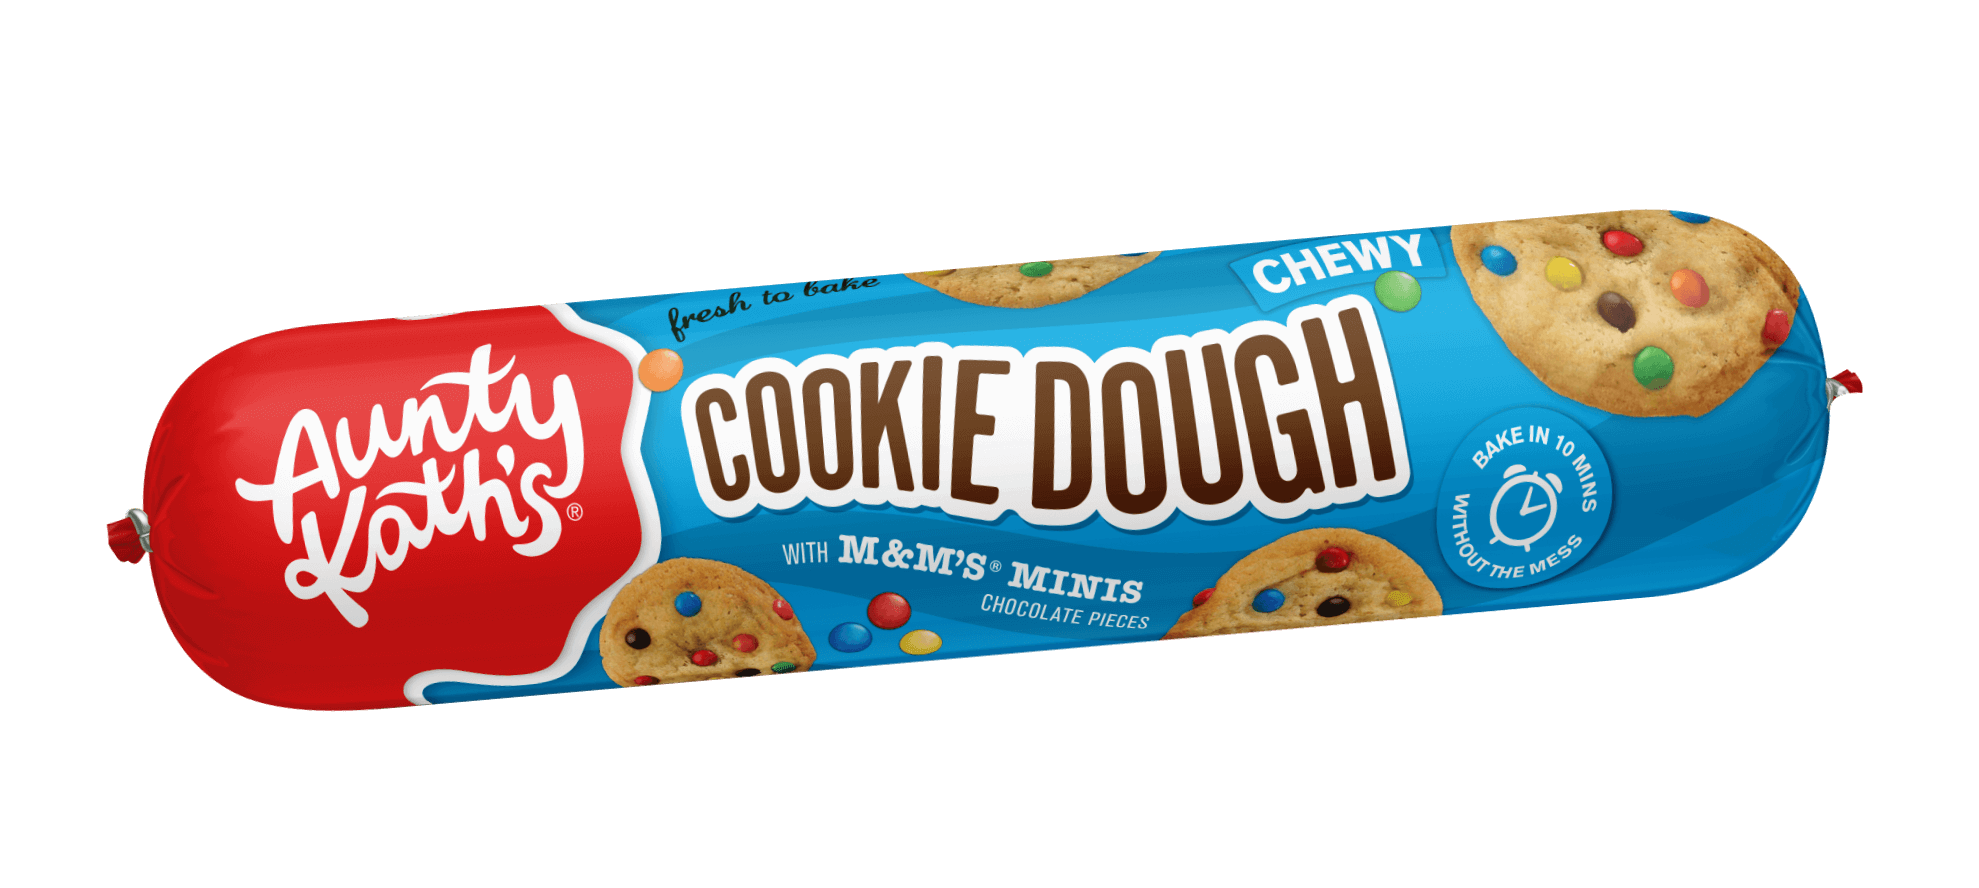 Aunty Kaths Cookie Dough Giveaway